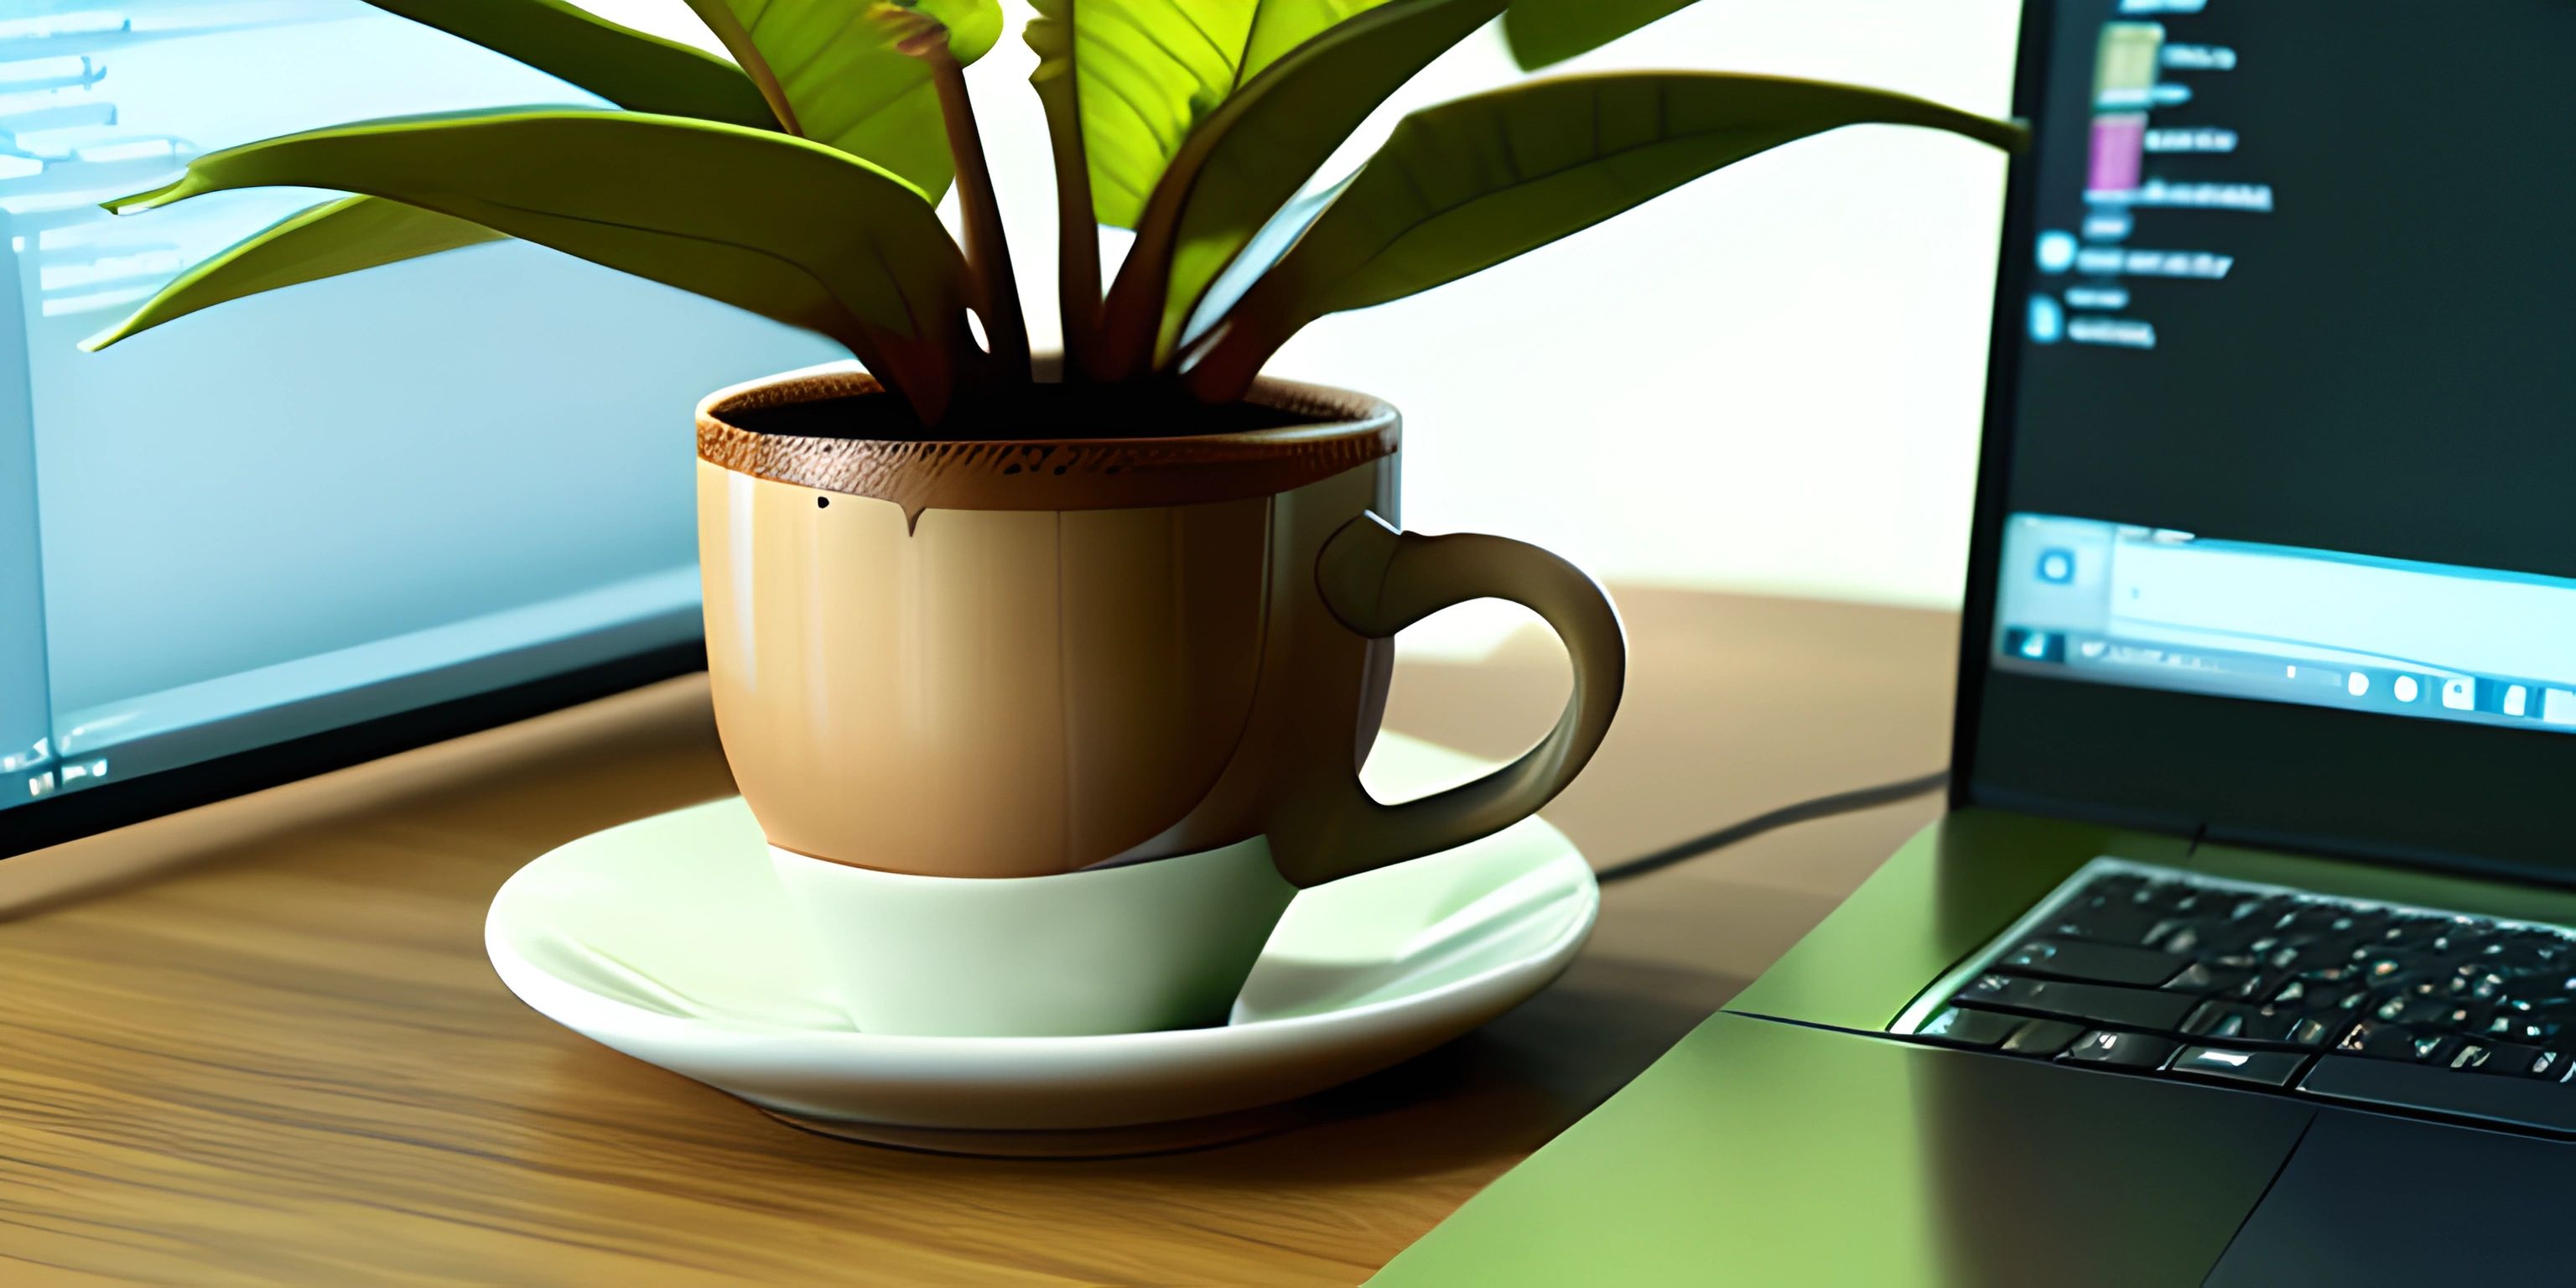 a cup on a table next to a laptop computer and a small plant on a saucer